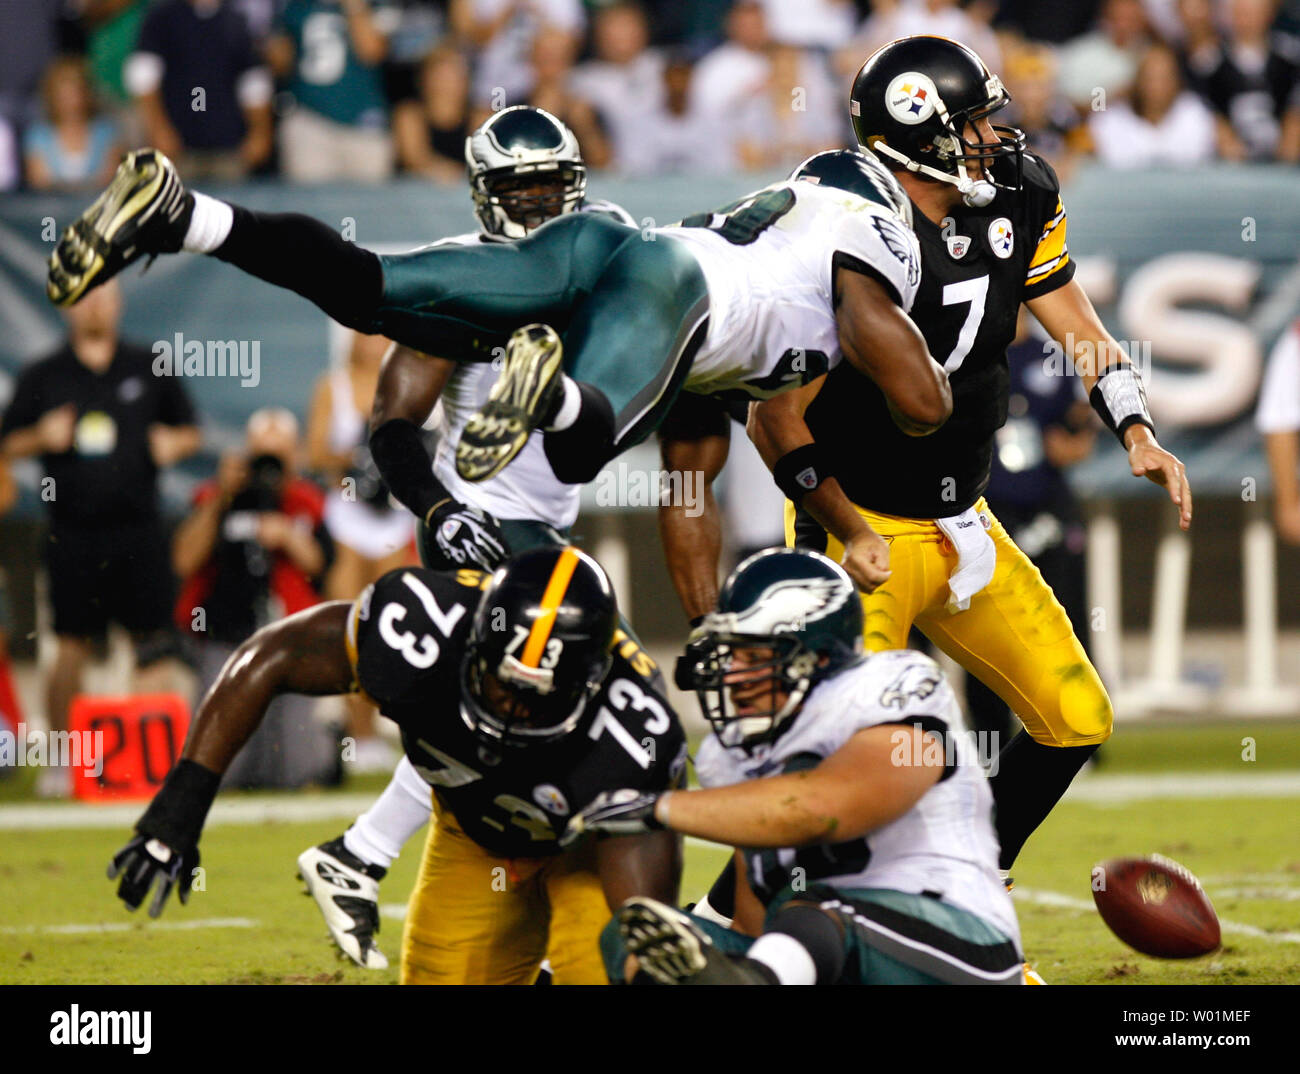 Philadelphia Eagles Brian Dawkins flies through the air over Pittsburgh Steelers Dendall Simmons (73) to break up a pass by Pittsburgh's quarterback Ben Roethlisberger during fourth quarter play in Philadelphia at Lincoln Financial Field September 21, 2008.  Philadelphia defeated Pittsburgh 15-6.      (UPI Photo/John Anderson) Stock Photo